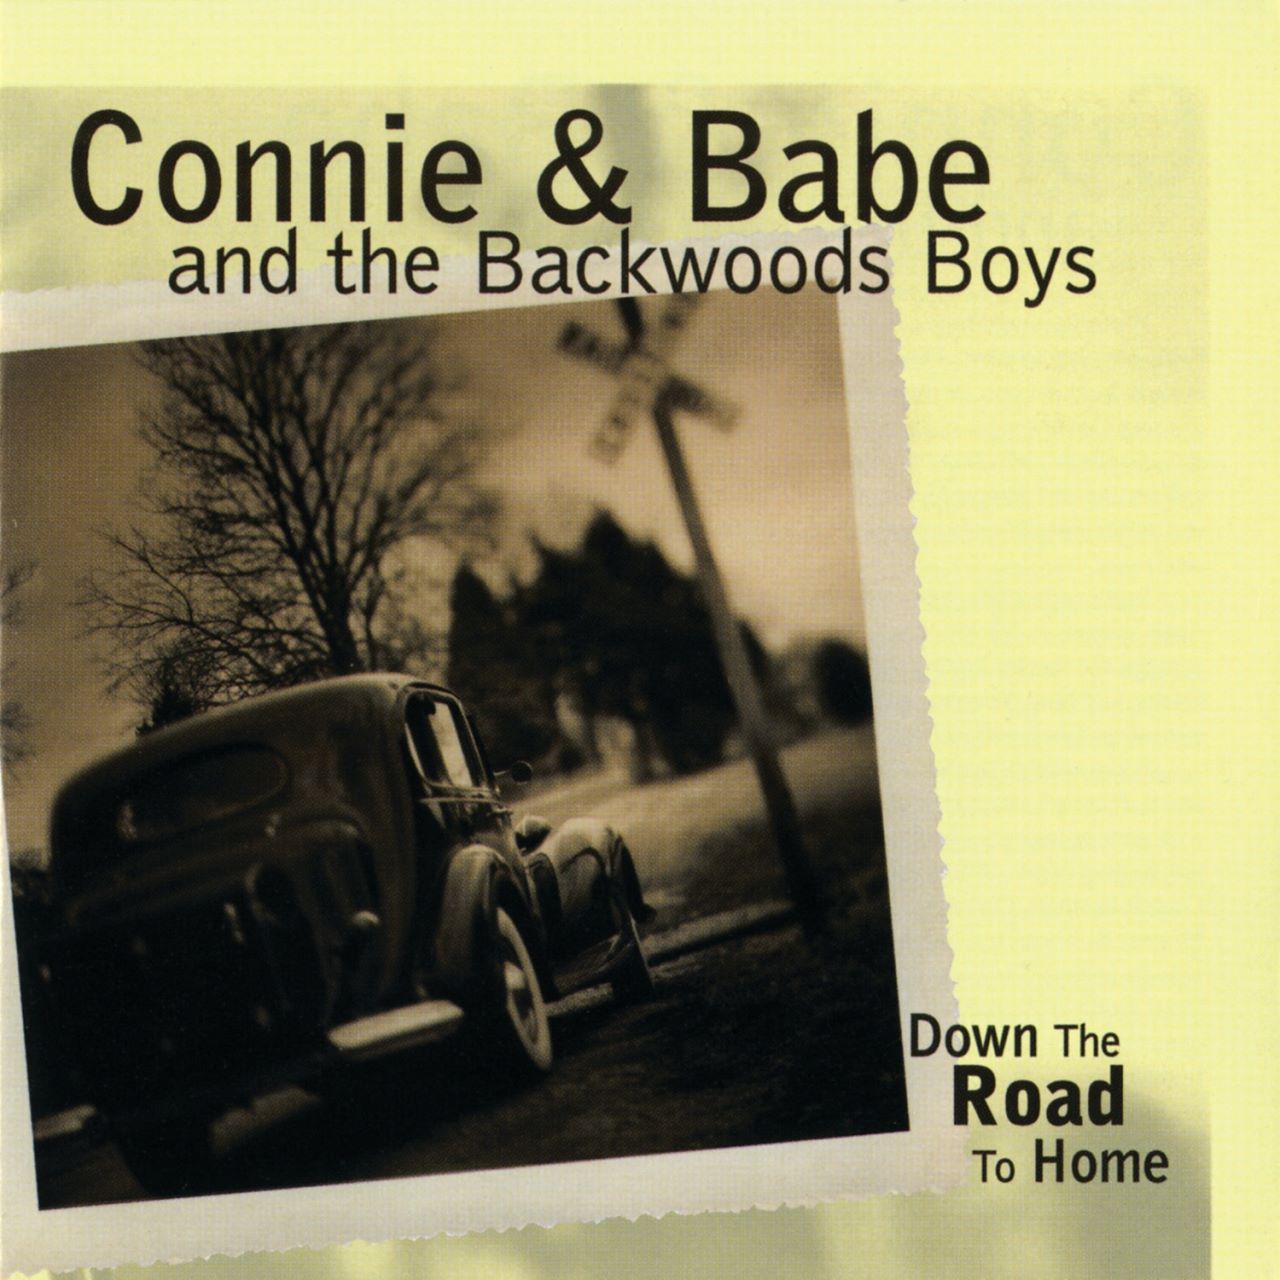 Connie & Babe And Backwoods Boys - Down The Road To Home cover album